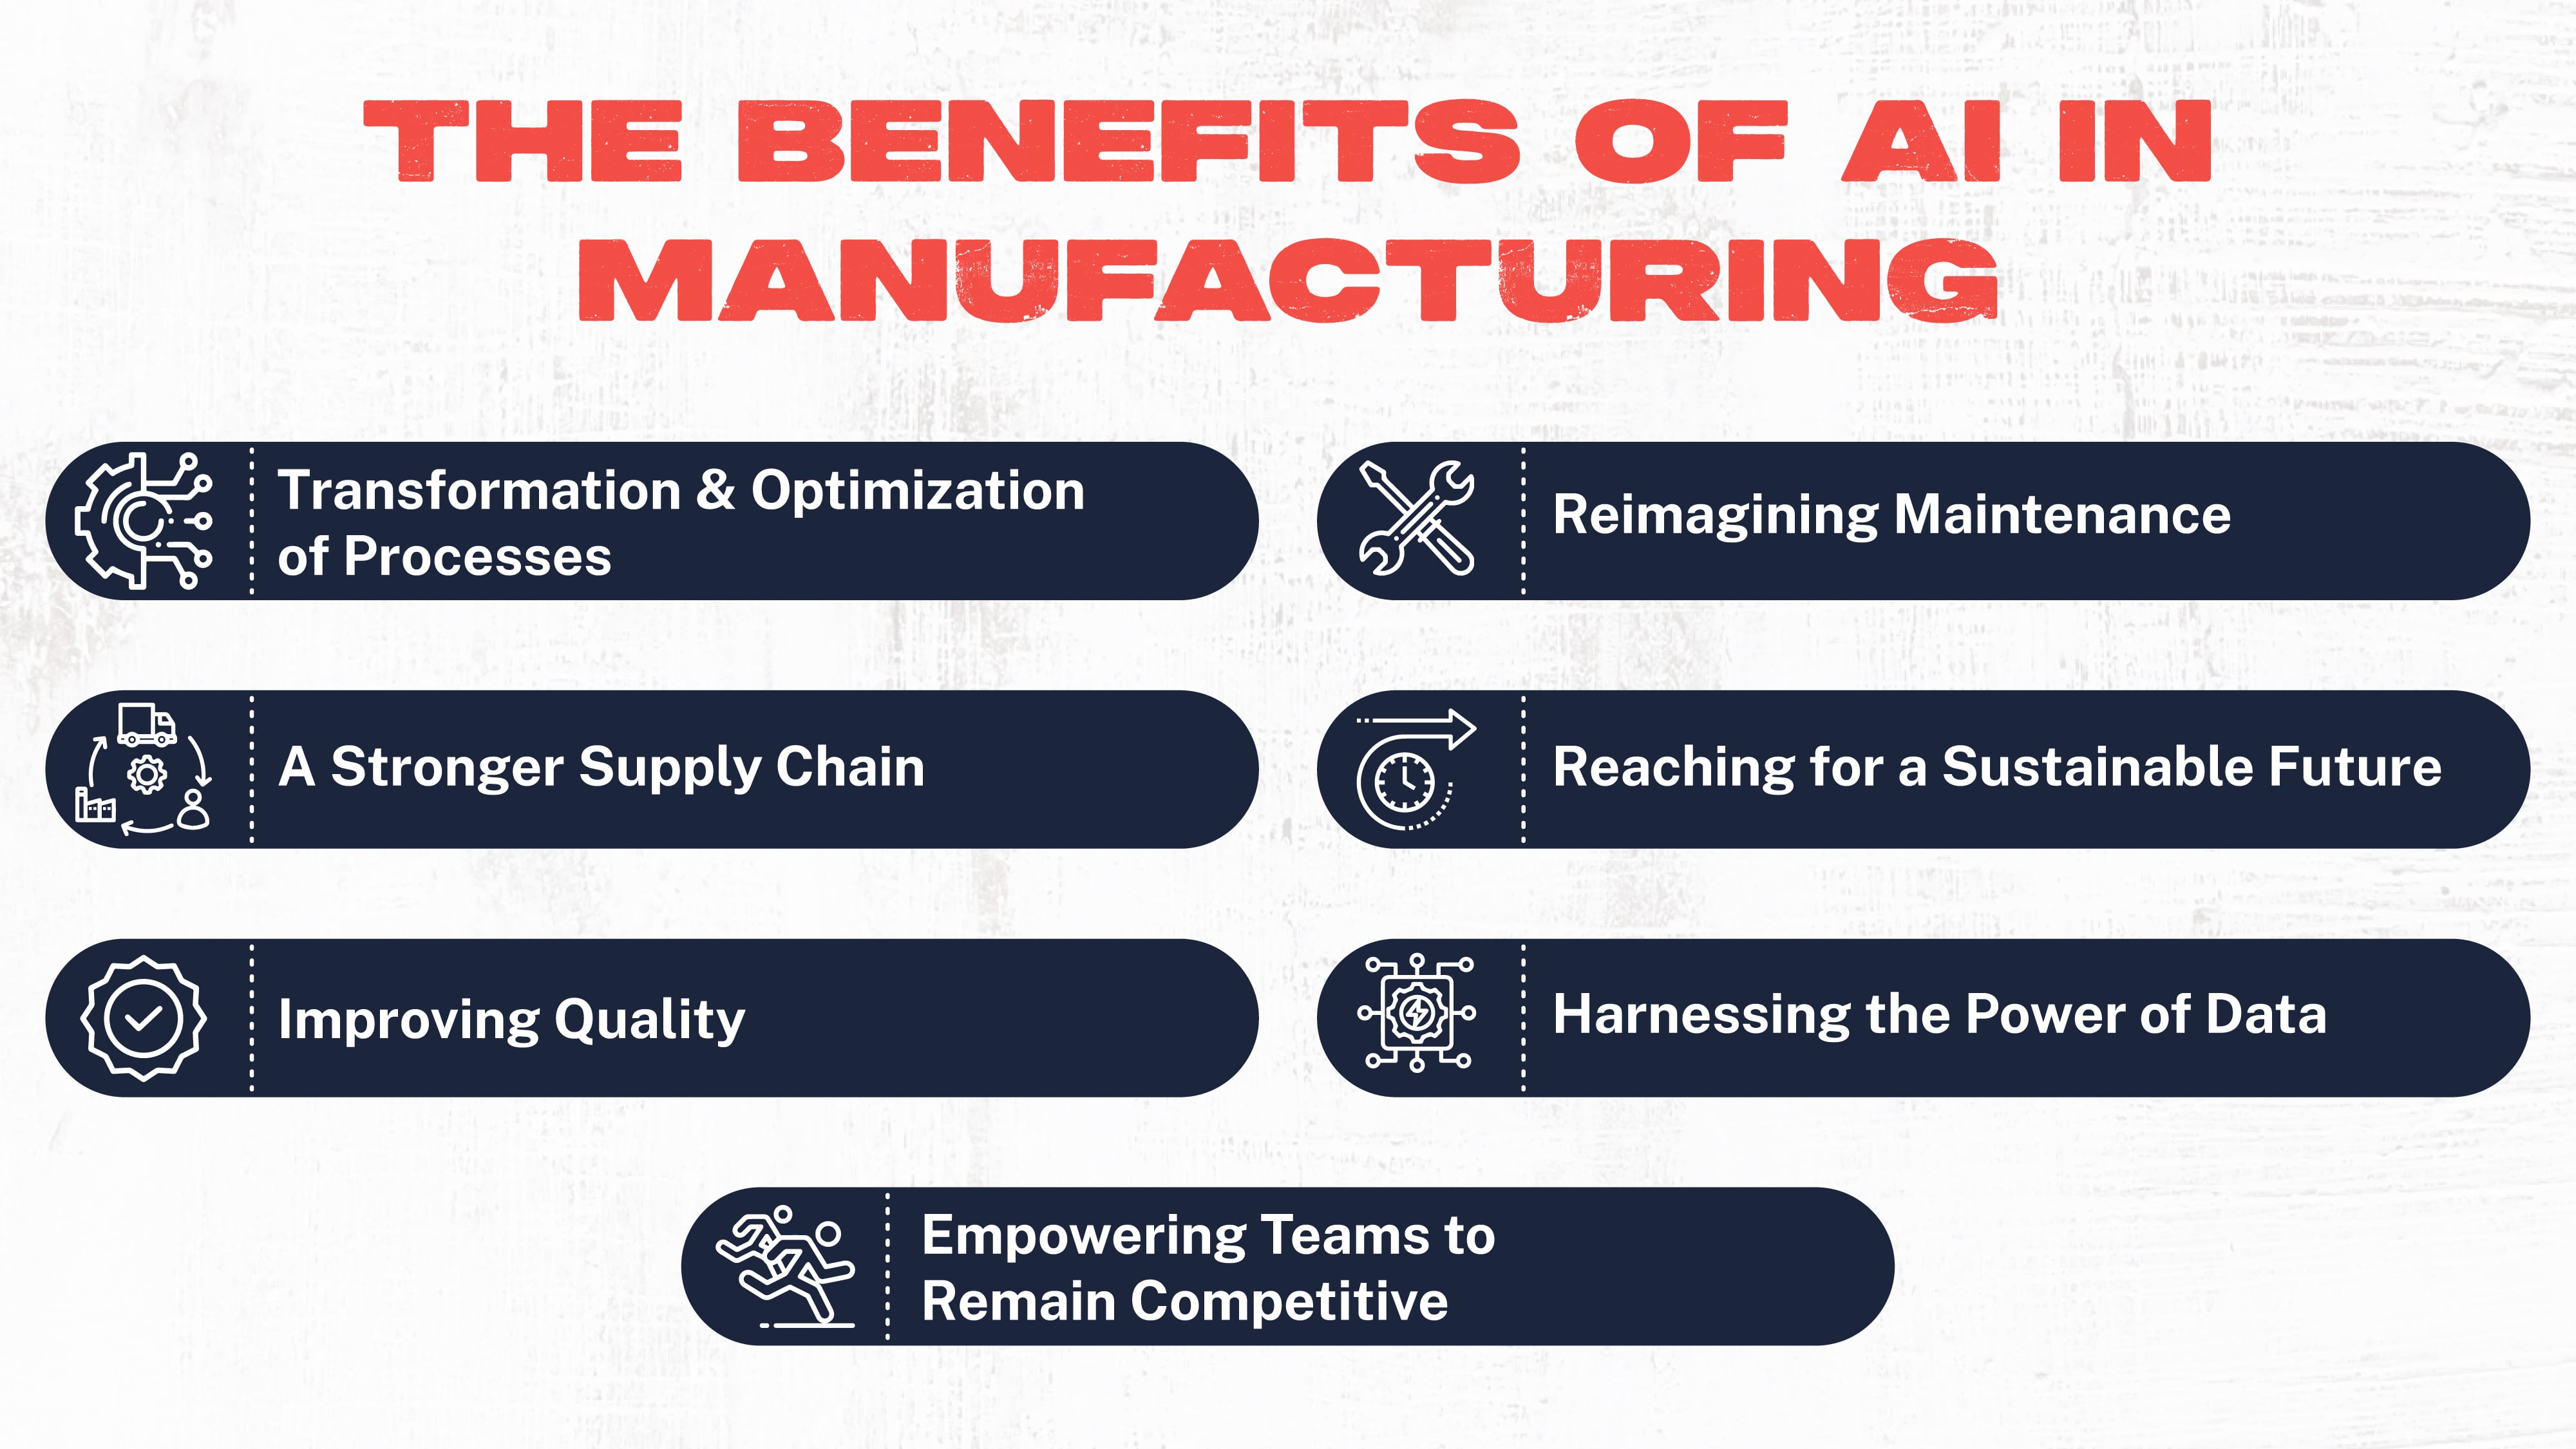 2 The Benefits of AI in Manufacturing